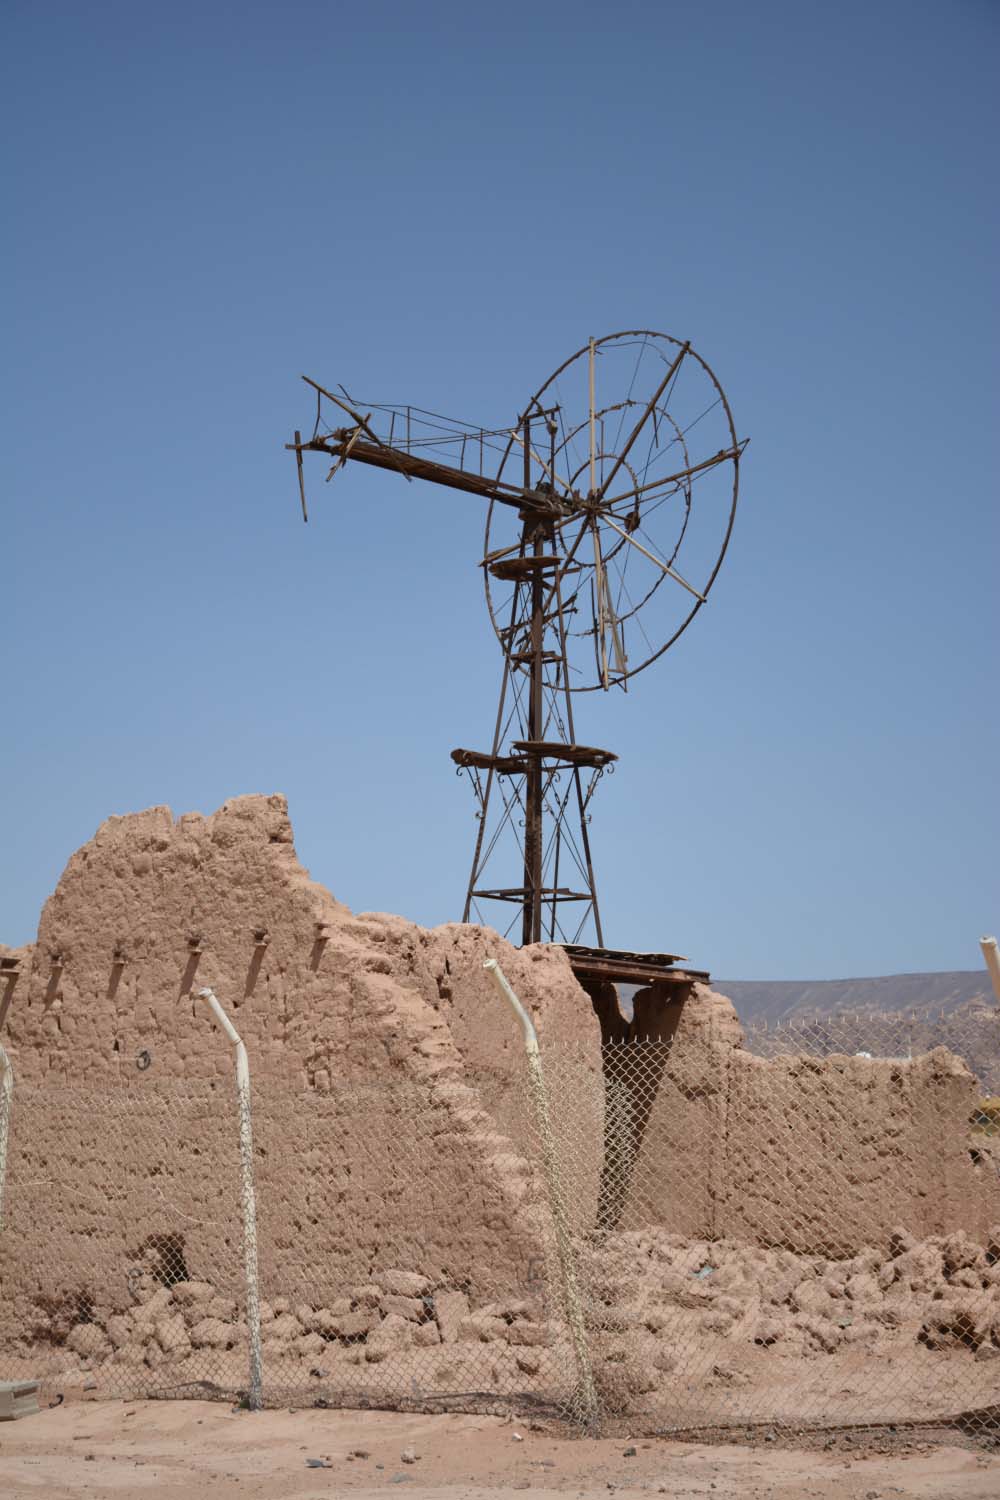 Detail of a windmill at the Al-Ula Railway Station